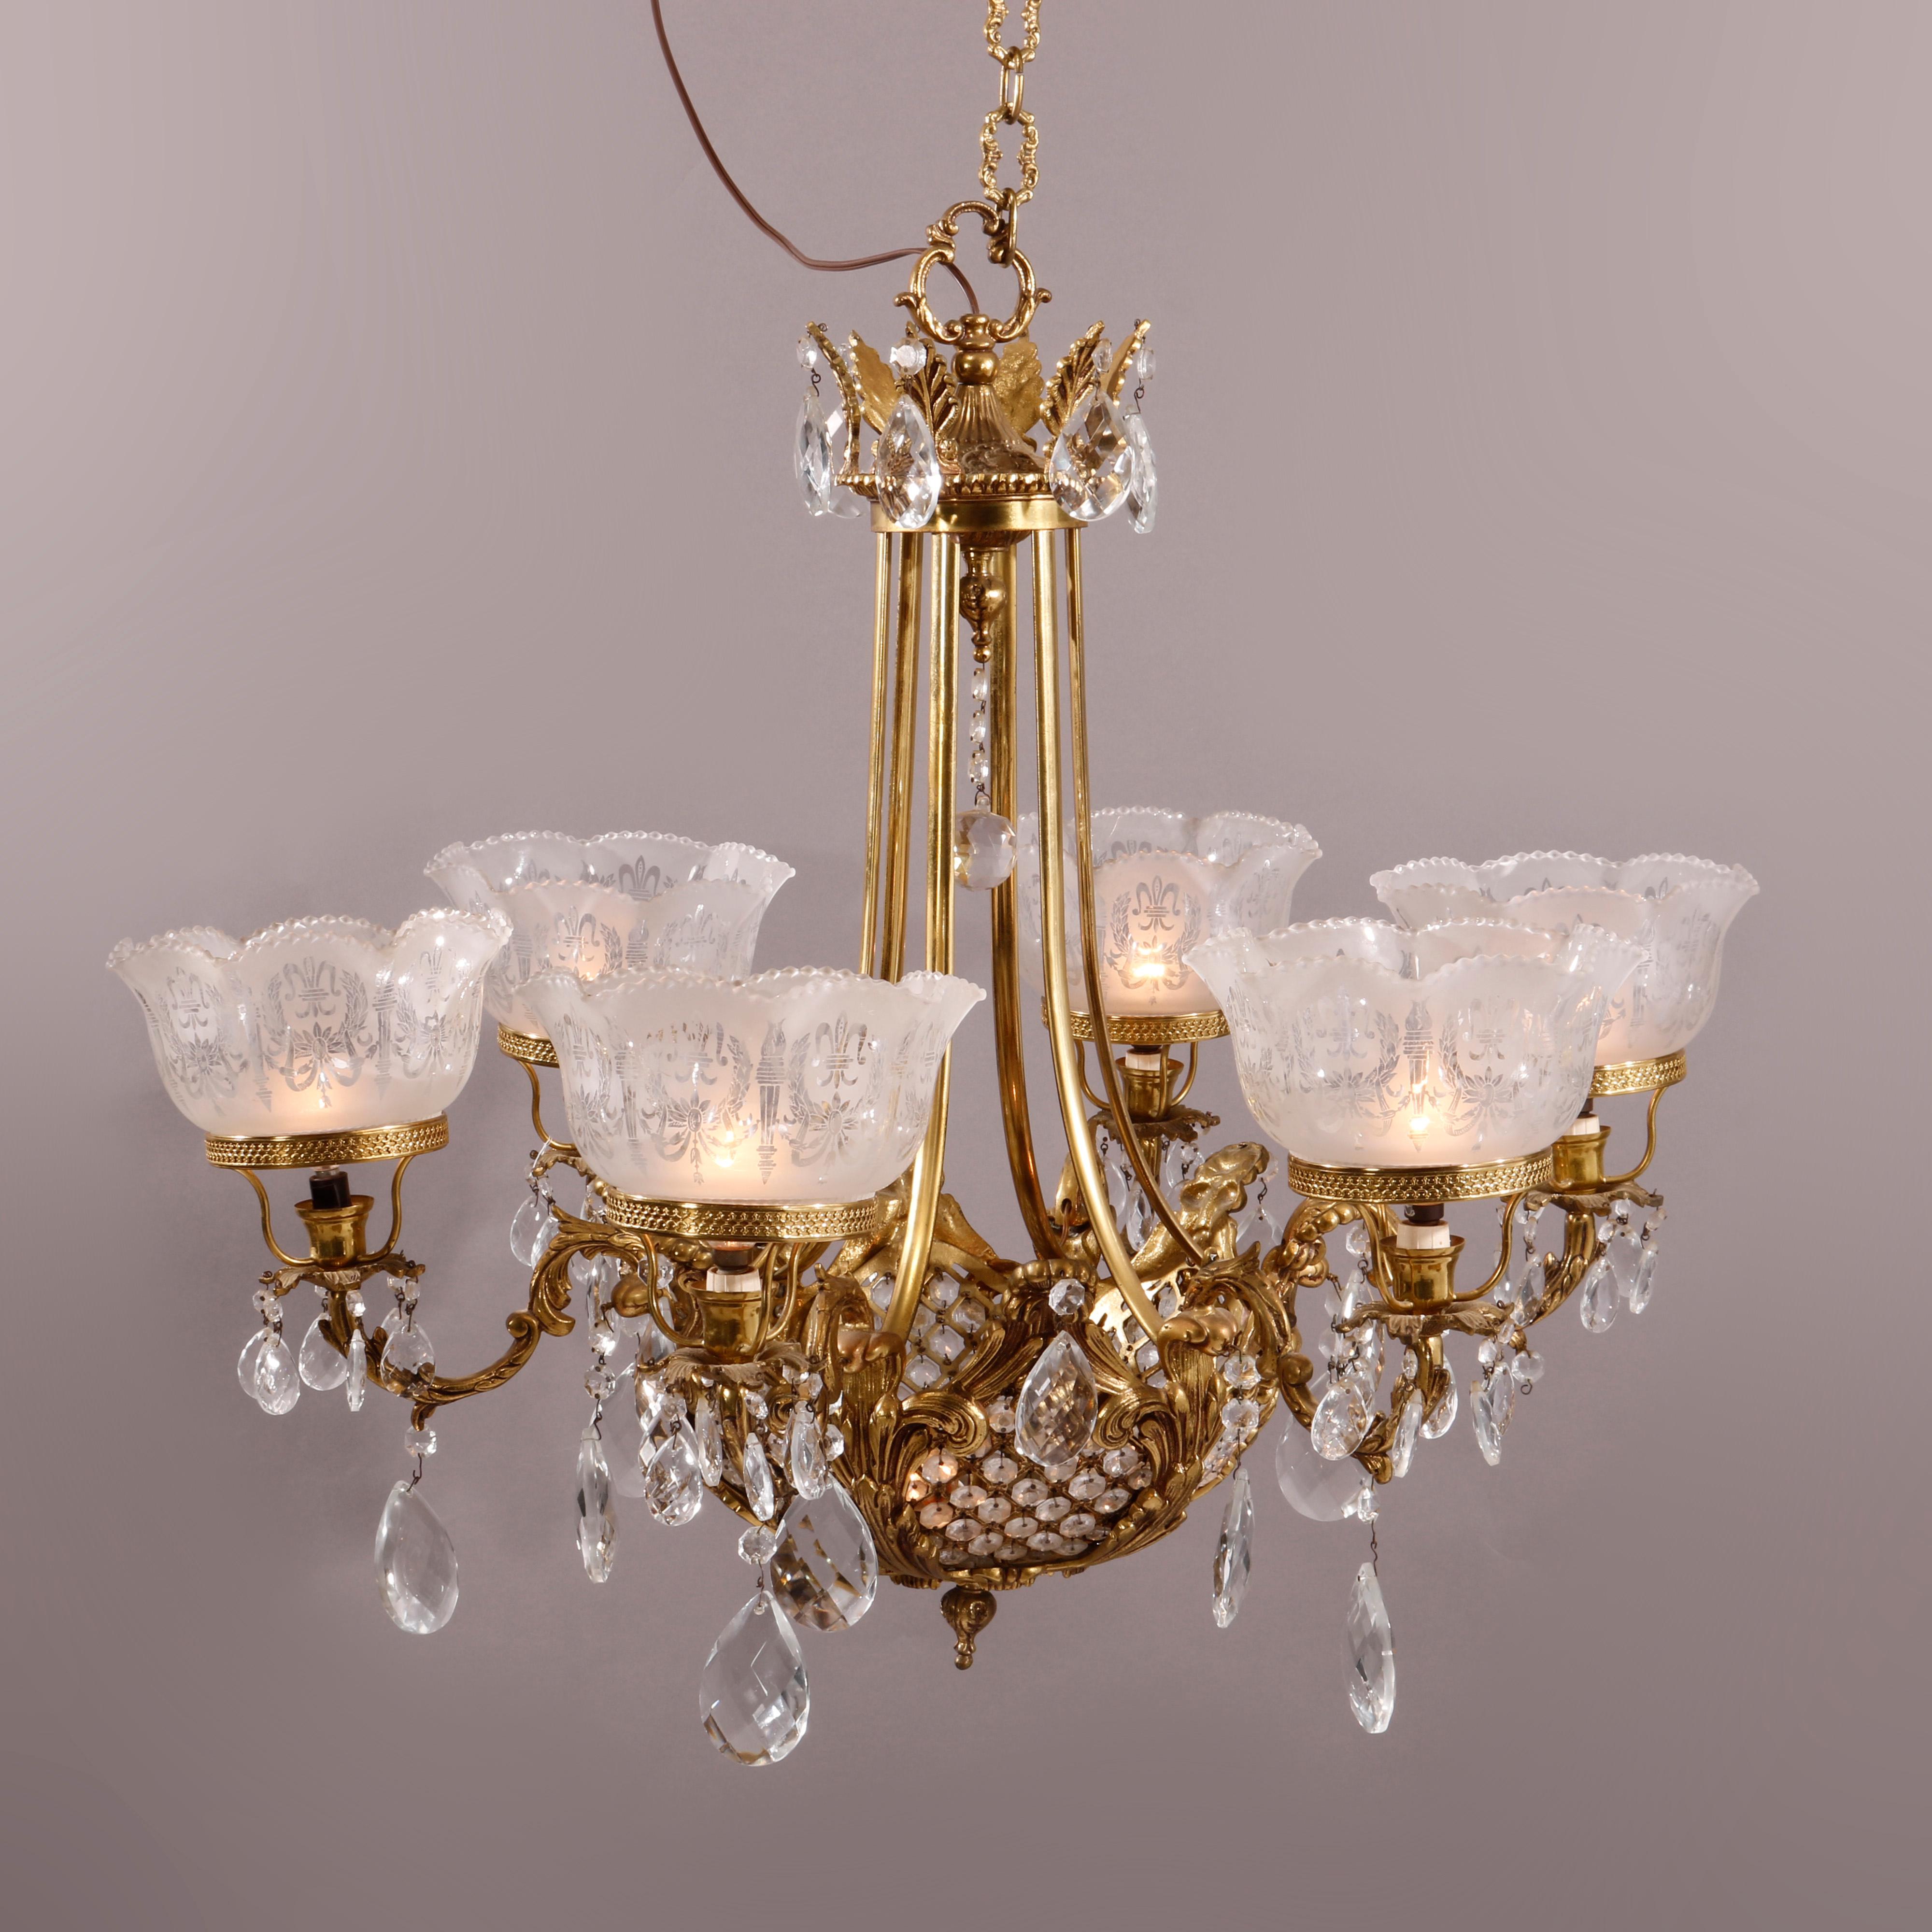 American French Bronze & Cut Crystal Five-Light Chandelier, 20th C